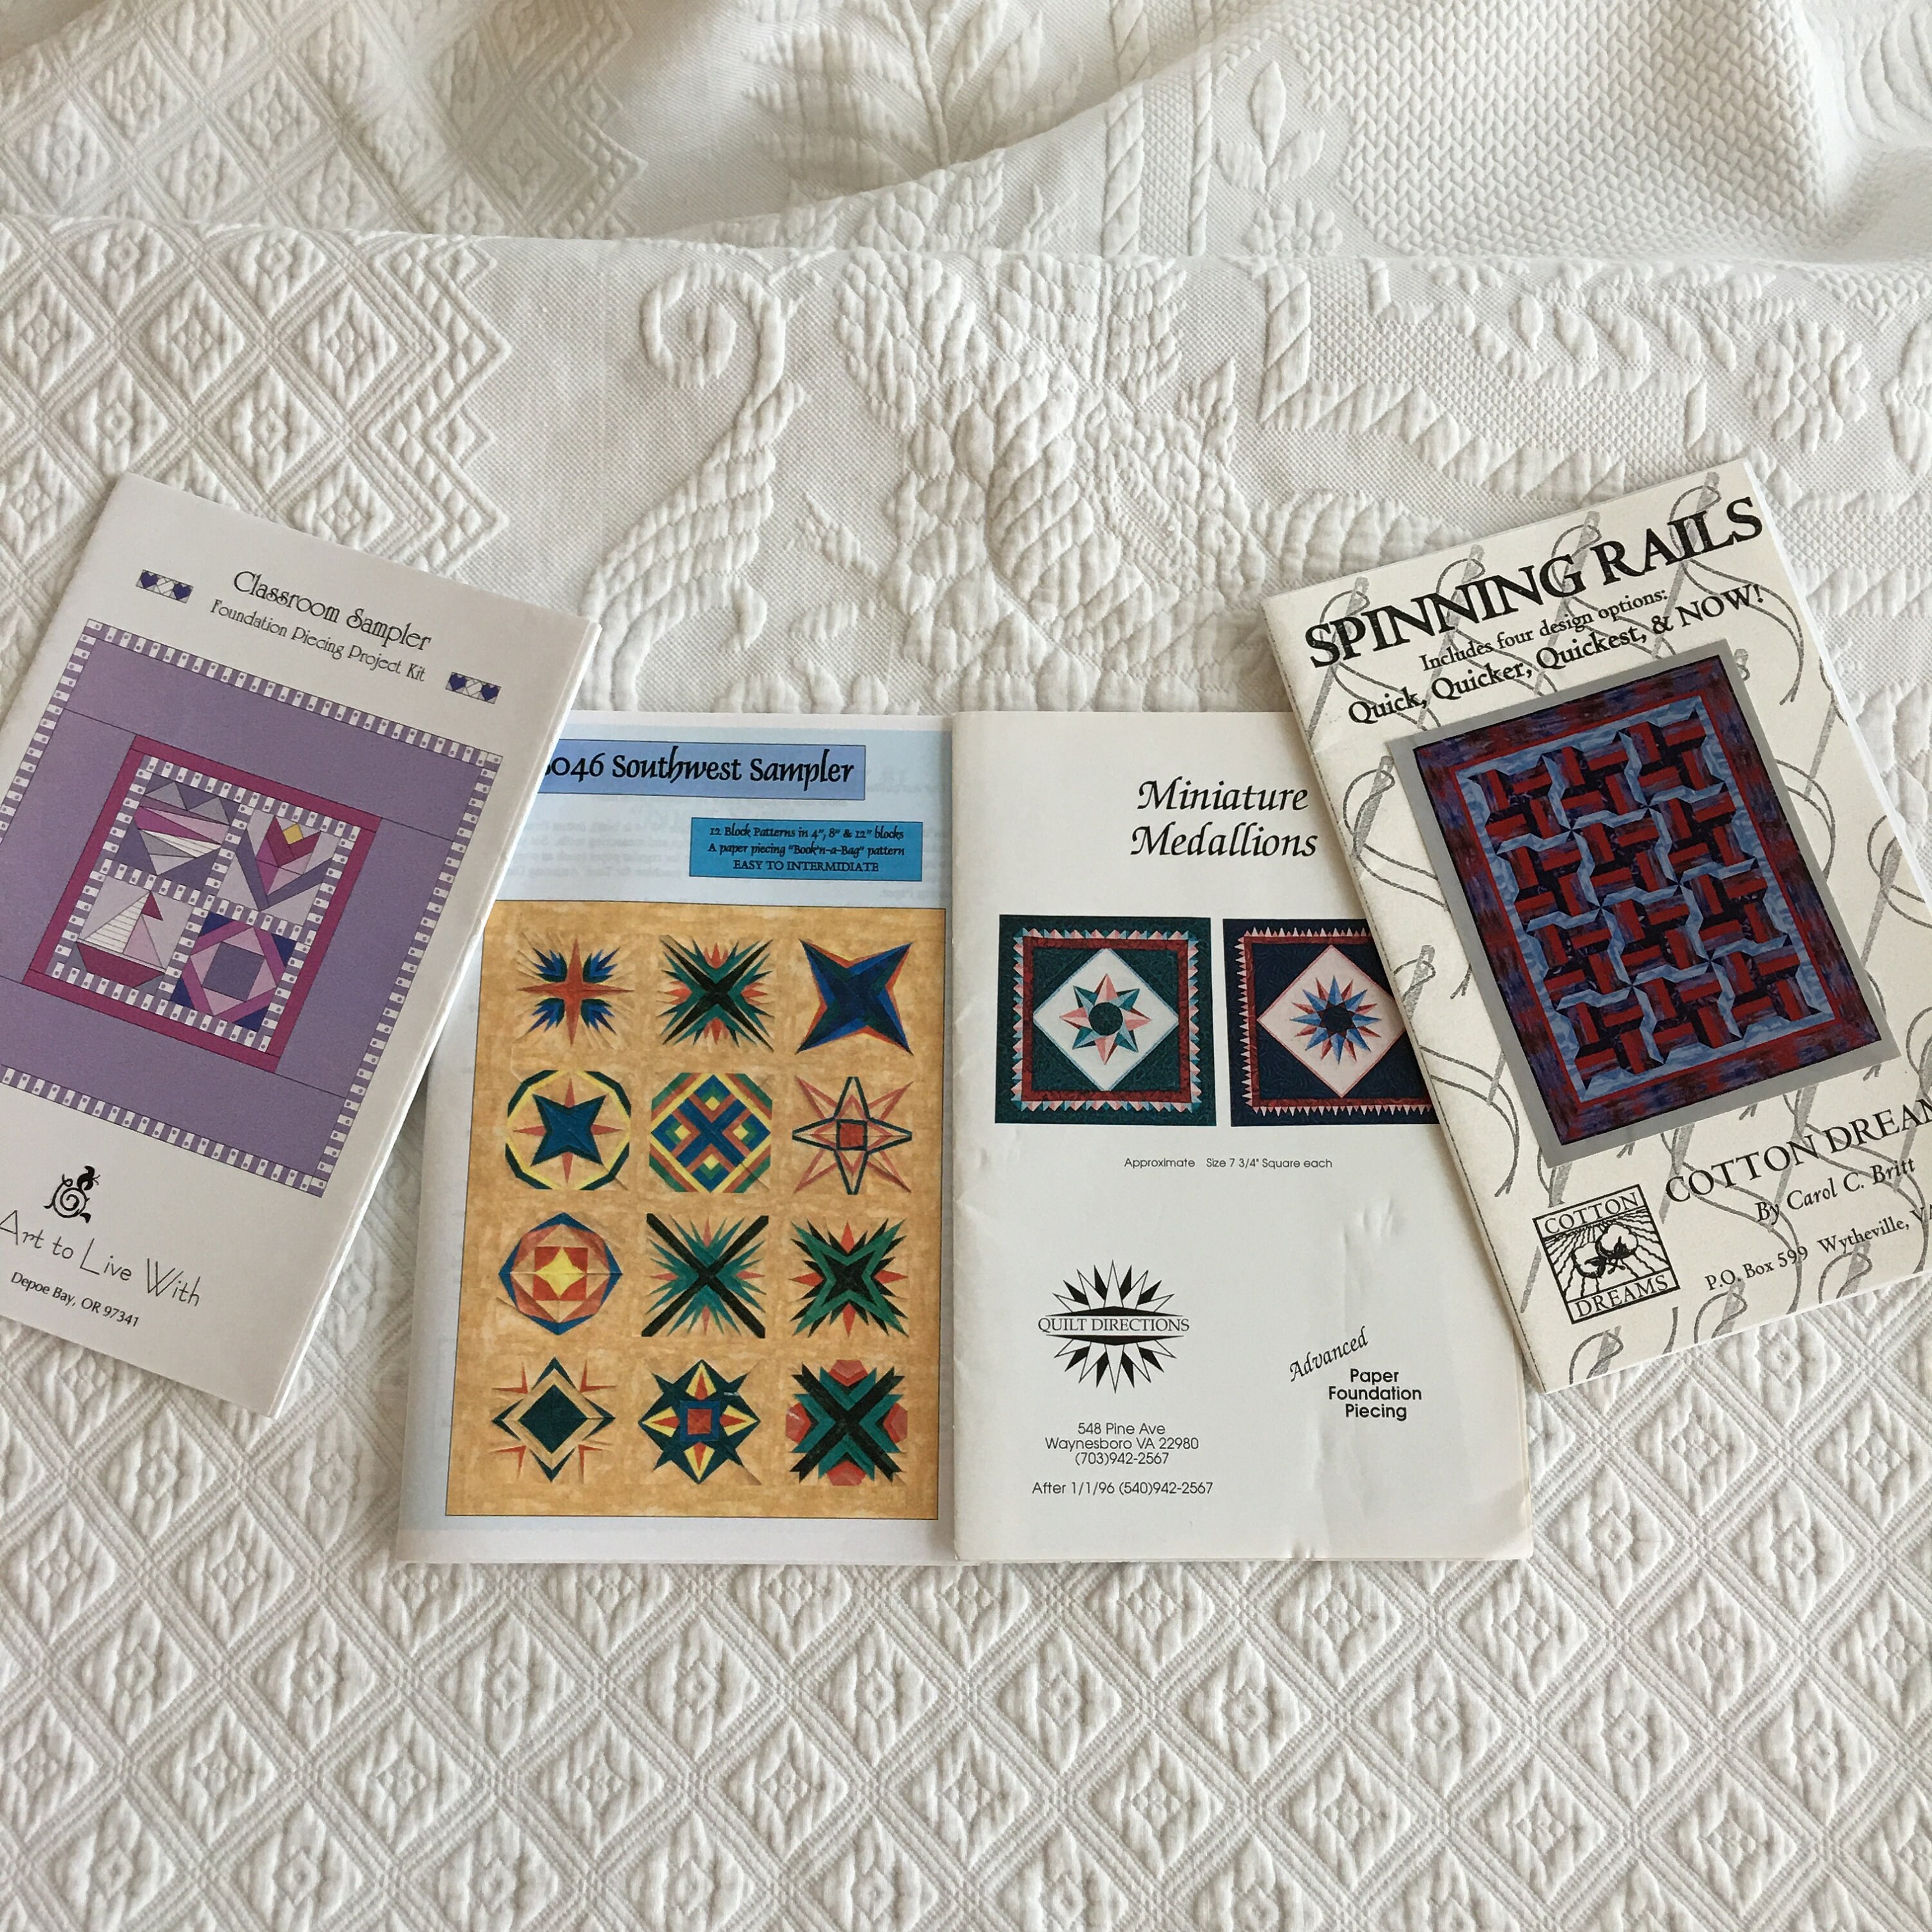 Millennium Quilt or Patches and Rails by or Precious Gems Choose From 4 Quilt Pattern Designs or Earth to Heaven by Duck Soup.